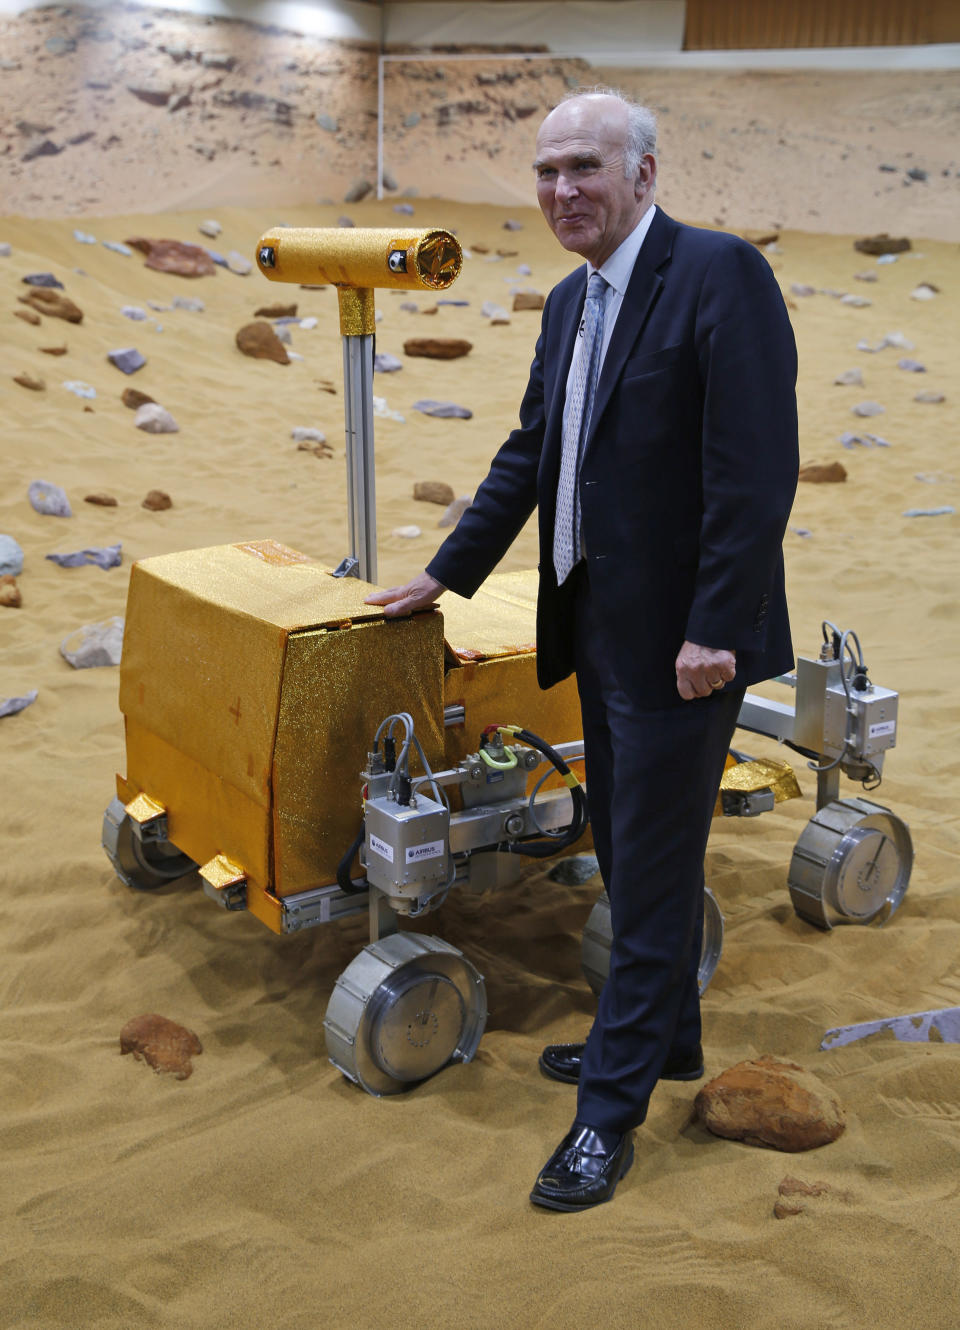 Britain's Business Secretary Vince Cable poses for the photographers next to a robotic vehicle being tested on the 'Mars Yard Test Area', the testing ground of the European Space Agency’s ExoMars program scheduled for 2018, in Stevenage, England, Thursday, March 27, 2014. It looks like a giant sandbox - except the sand has a reddish tint and the “toys” on display are very expensive prototypes designed to withstand the rigors of landing on Mars. The scientists here work on the development of the autonomous navigation capabilities of the vehicle, so by being in communication with controllers on earth twice a day, will be able to use the transmitted information to navigate to new destinations on Mars. (AP Photo/Lefteris Pitarakis)